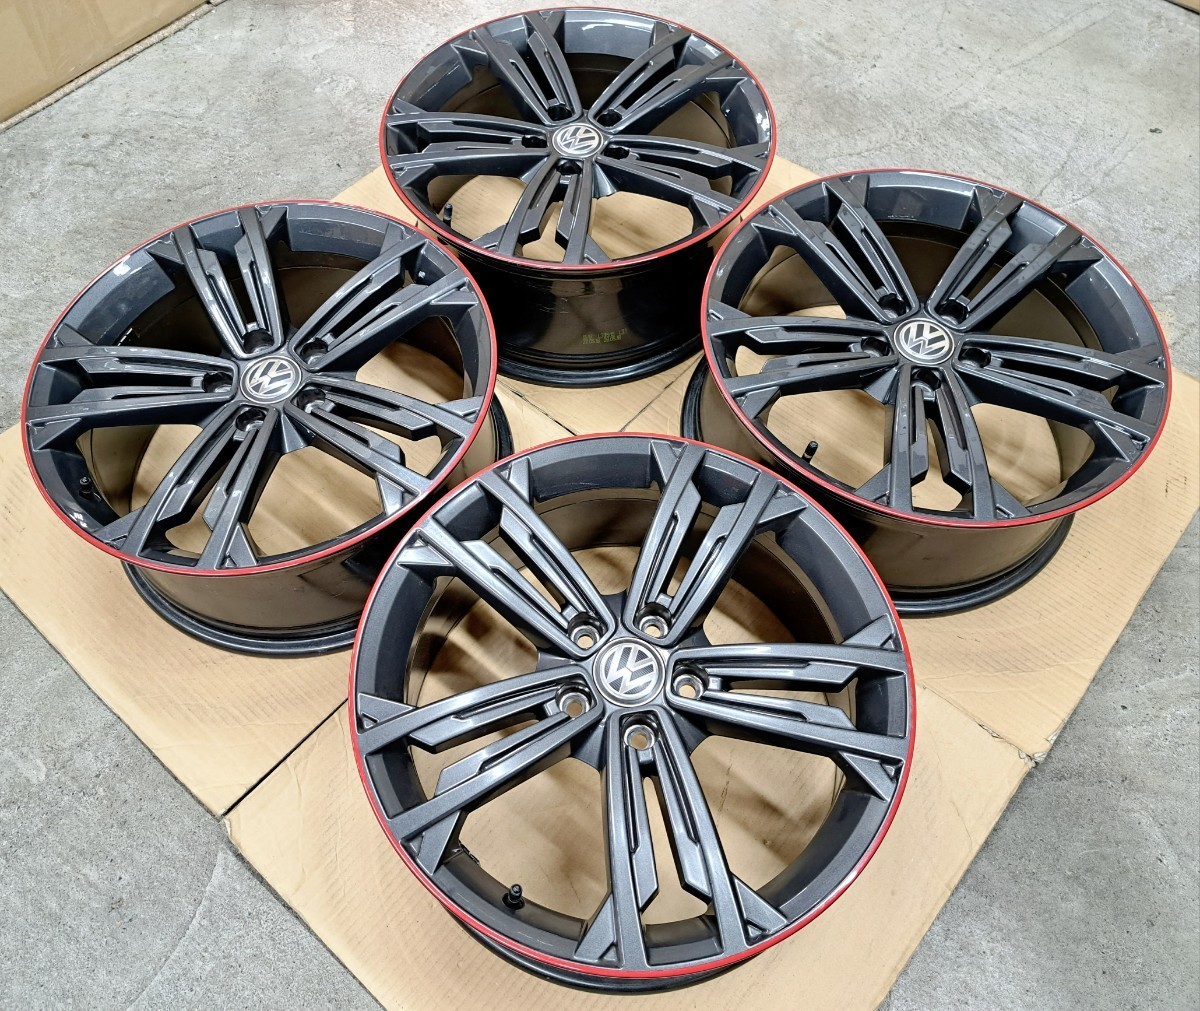 [ finest quality goods ] Volkswagen Golf 7 GTI dynamic last special edition original wheel 4 pcs set 7.5J 18 -inch 112-5H considerably clean 